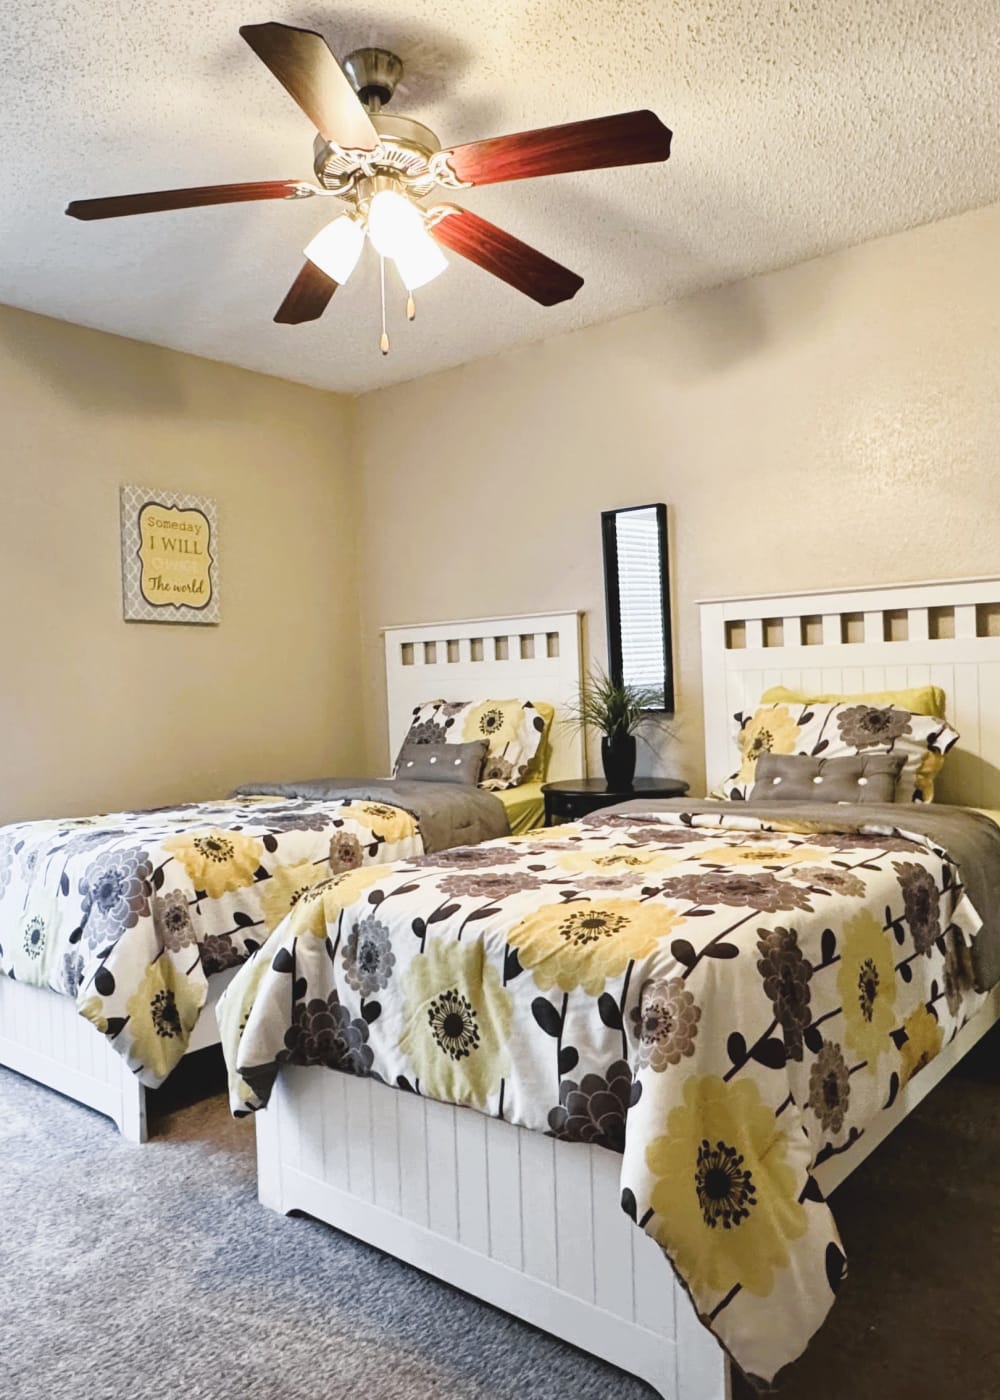 A furnished bedroom at Fountaingate in Wichita Falls, Texas